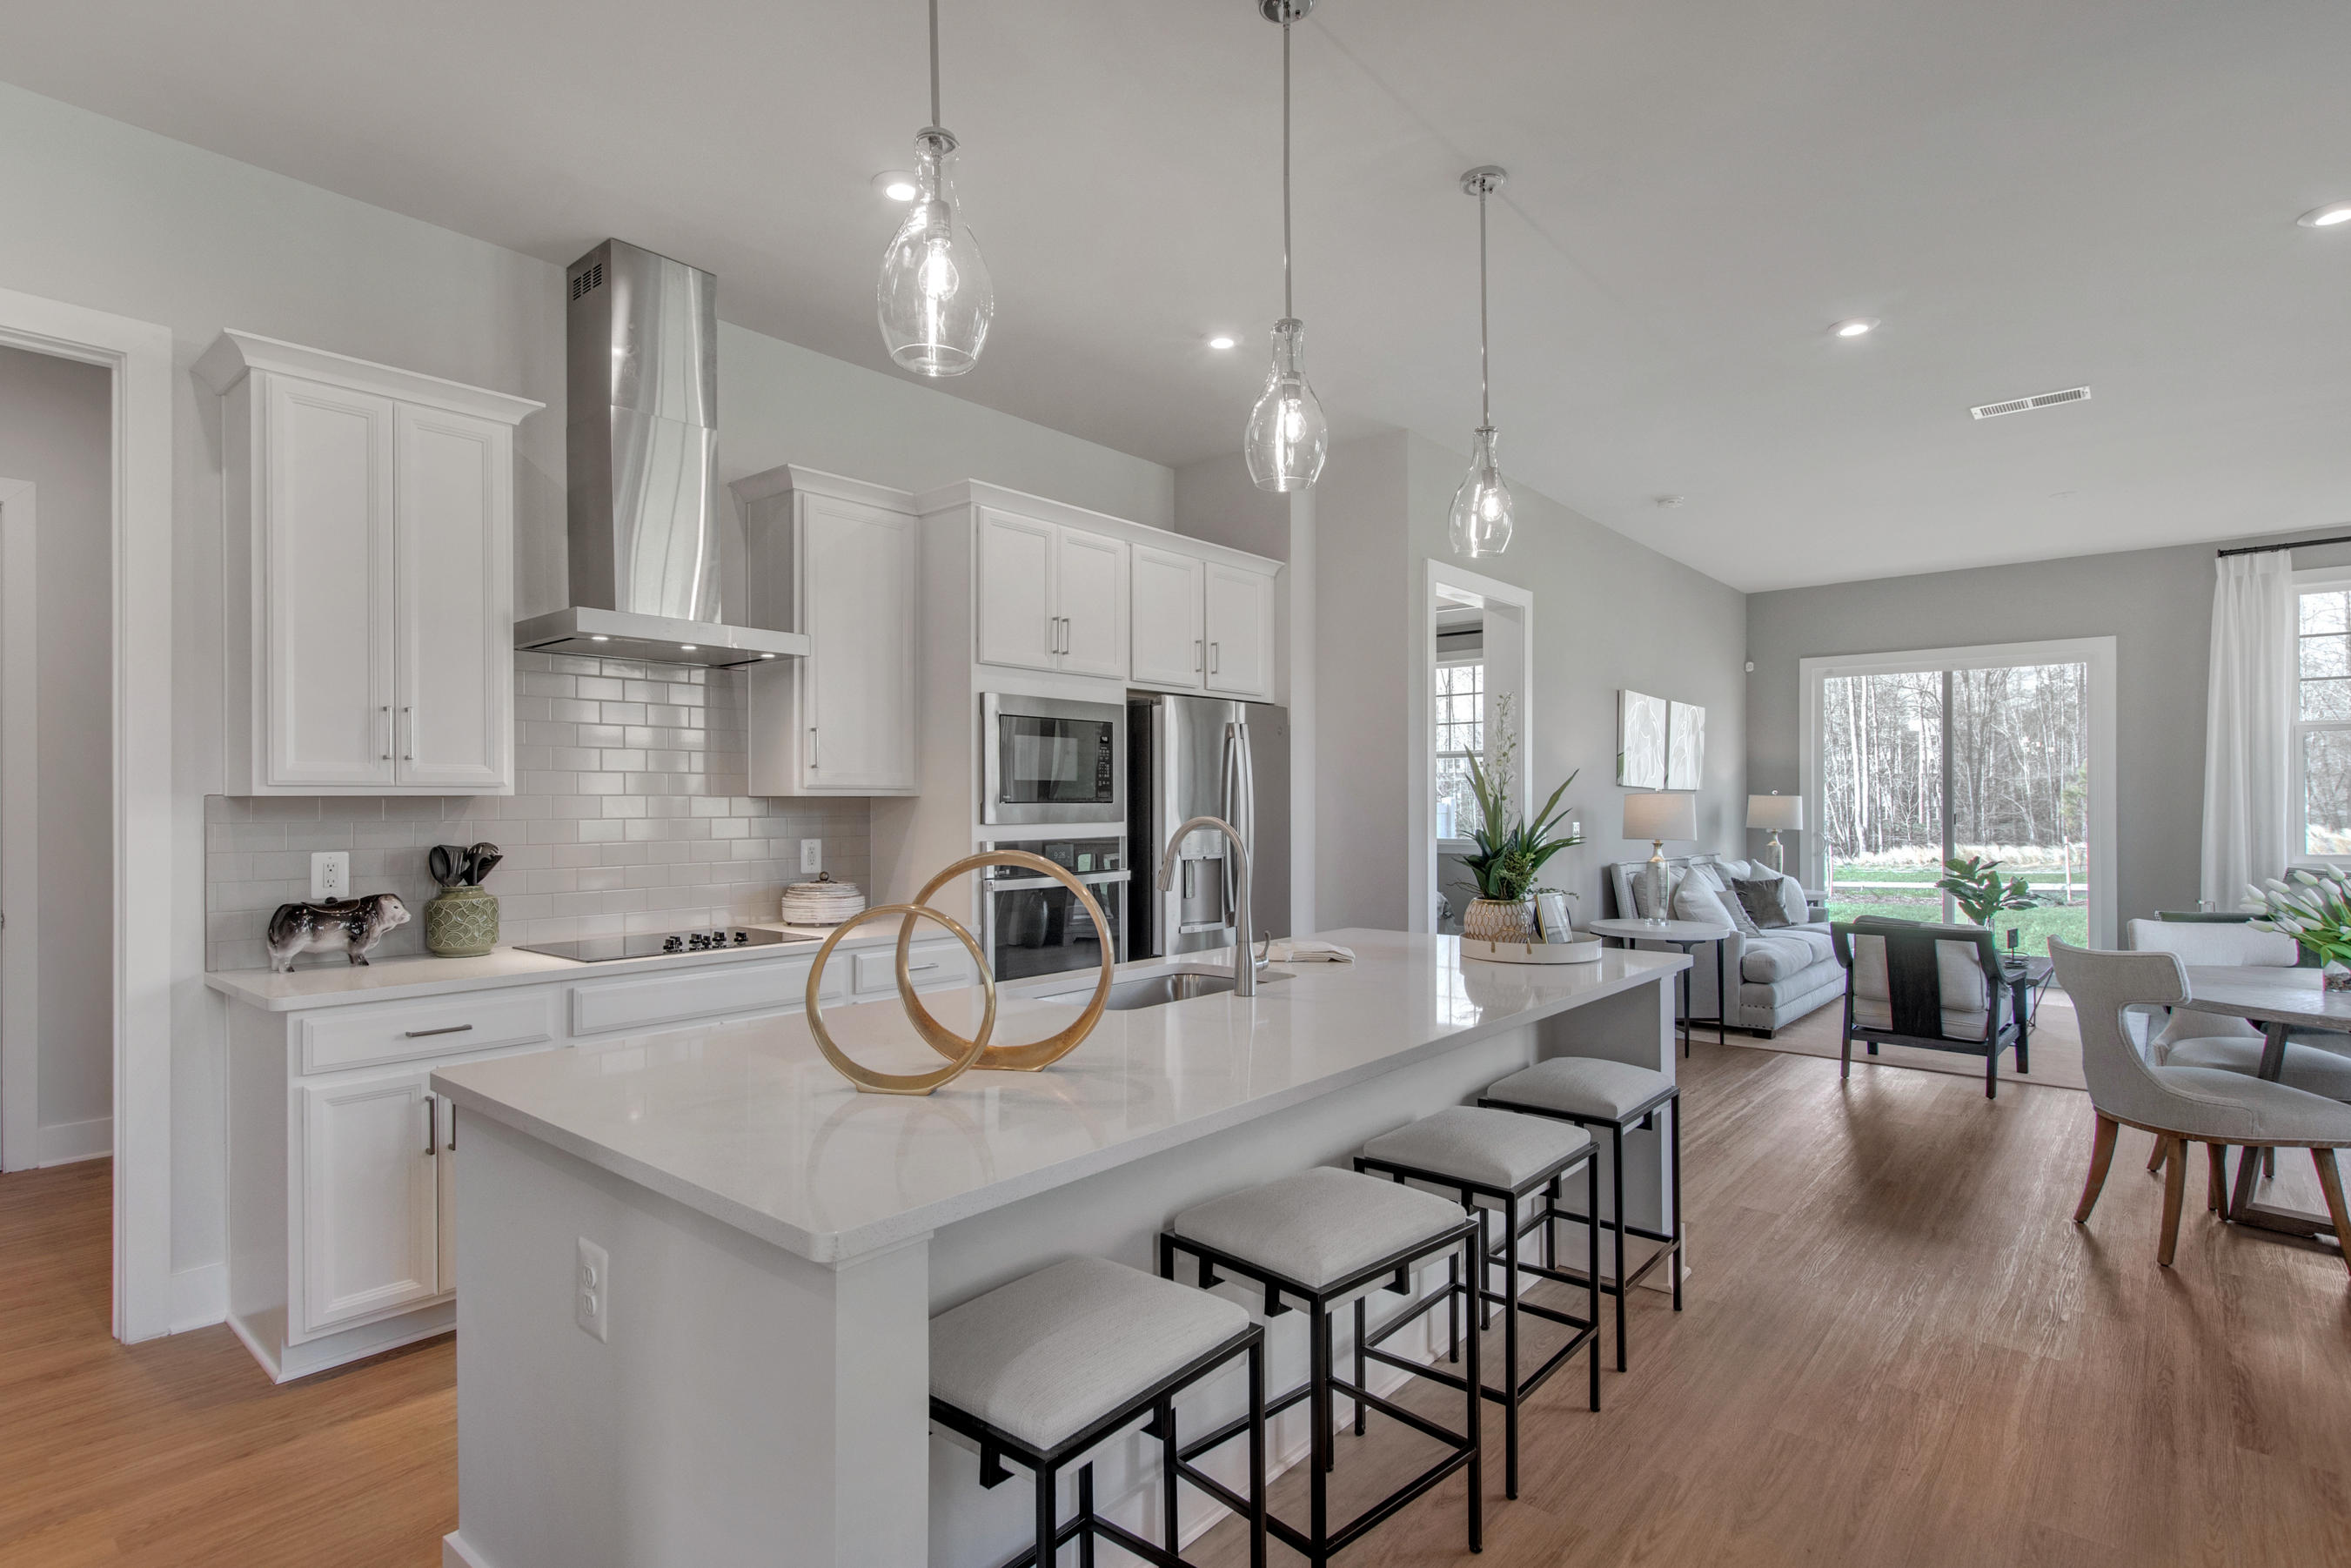 Image 5 | Stanley Martin Homes at Brookhill Commons